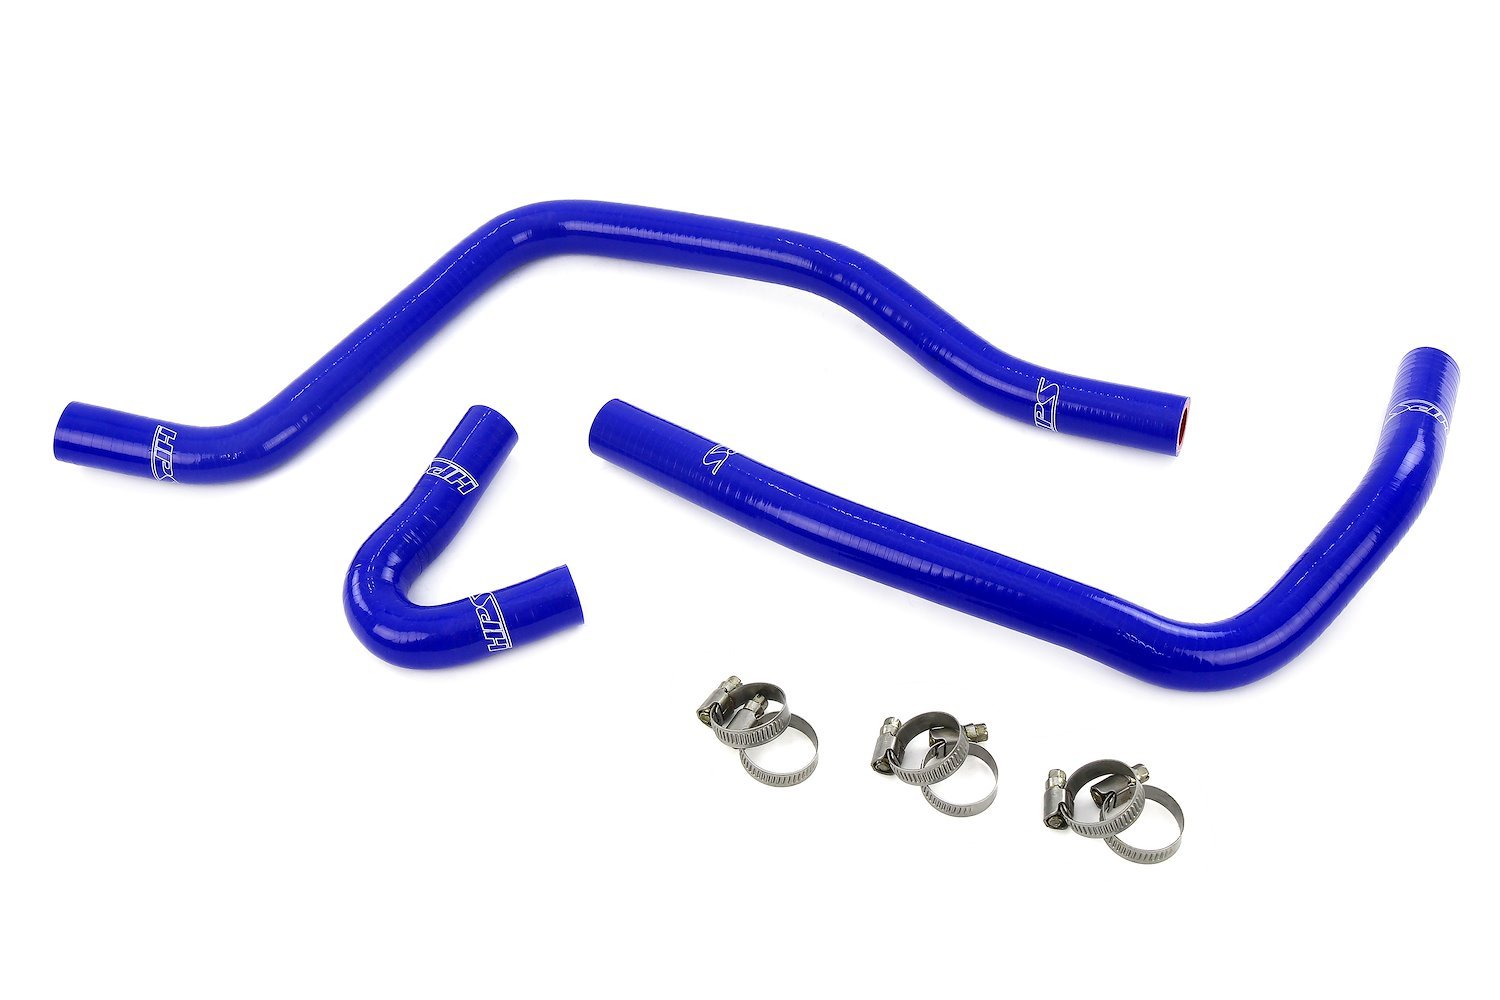 57-2120-BLUE Heater Hose Kit, 3-Ply Reinforced Silicone, Replaces OEM Rubber Heater Coolant Hoses